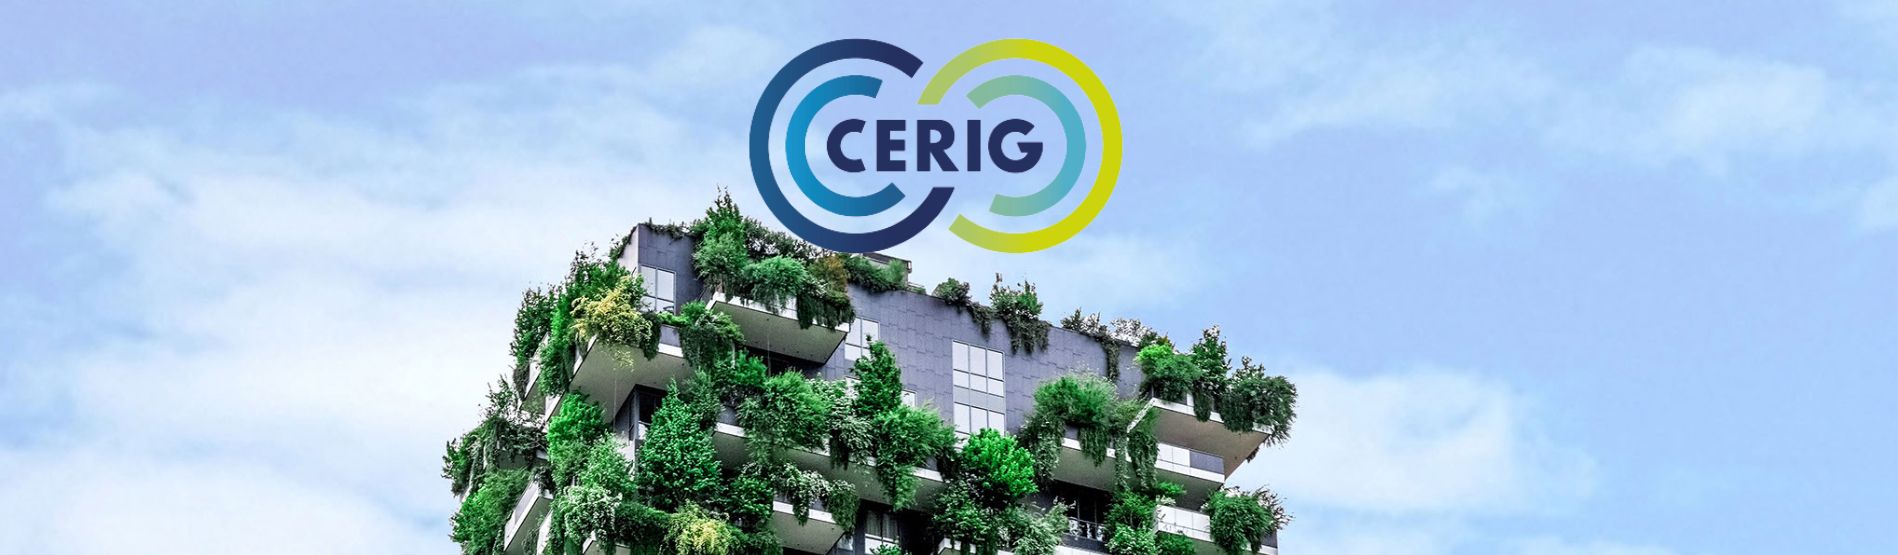 Circular Economy Research and Innovation Group Wales CERIG logo